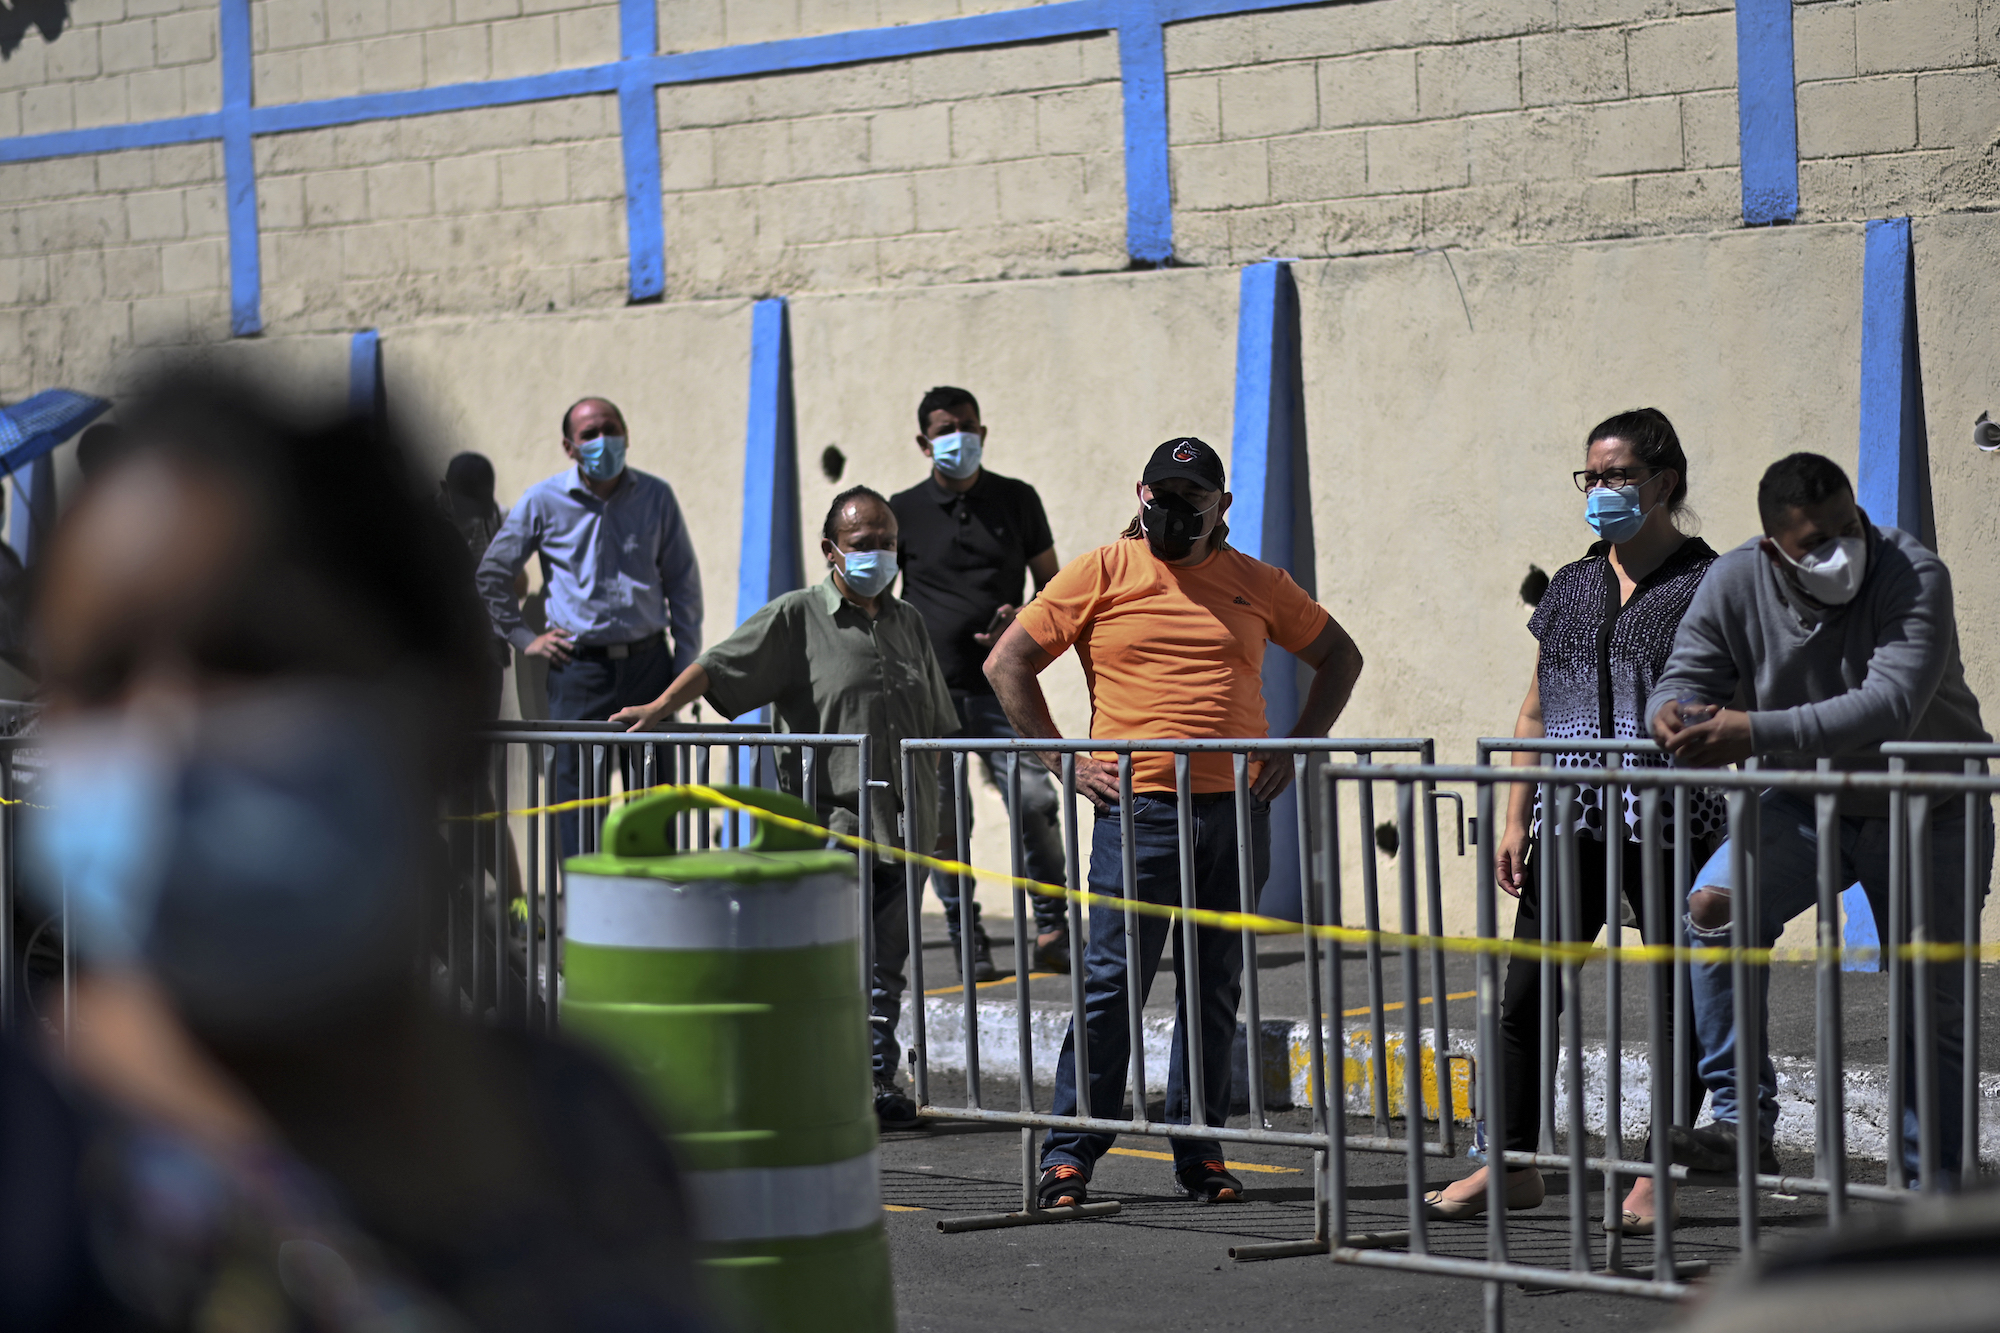 People line up to have a COVID-19 test done at a mobile laboratory in Guatemala City on Jan. 27, 2021. Photo: John Ordonez/AFP via Getty Images.
